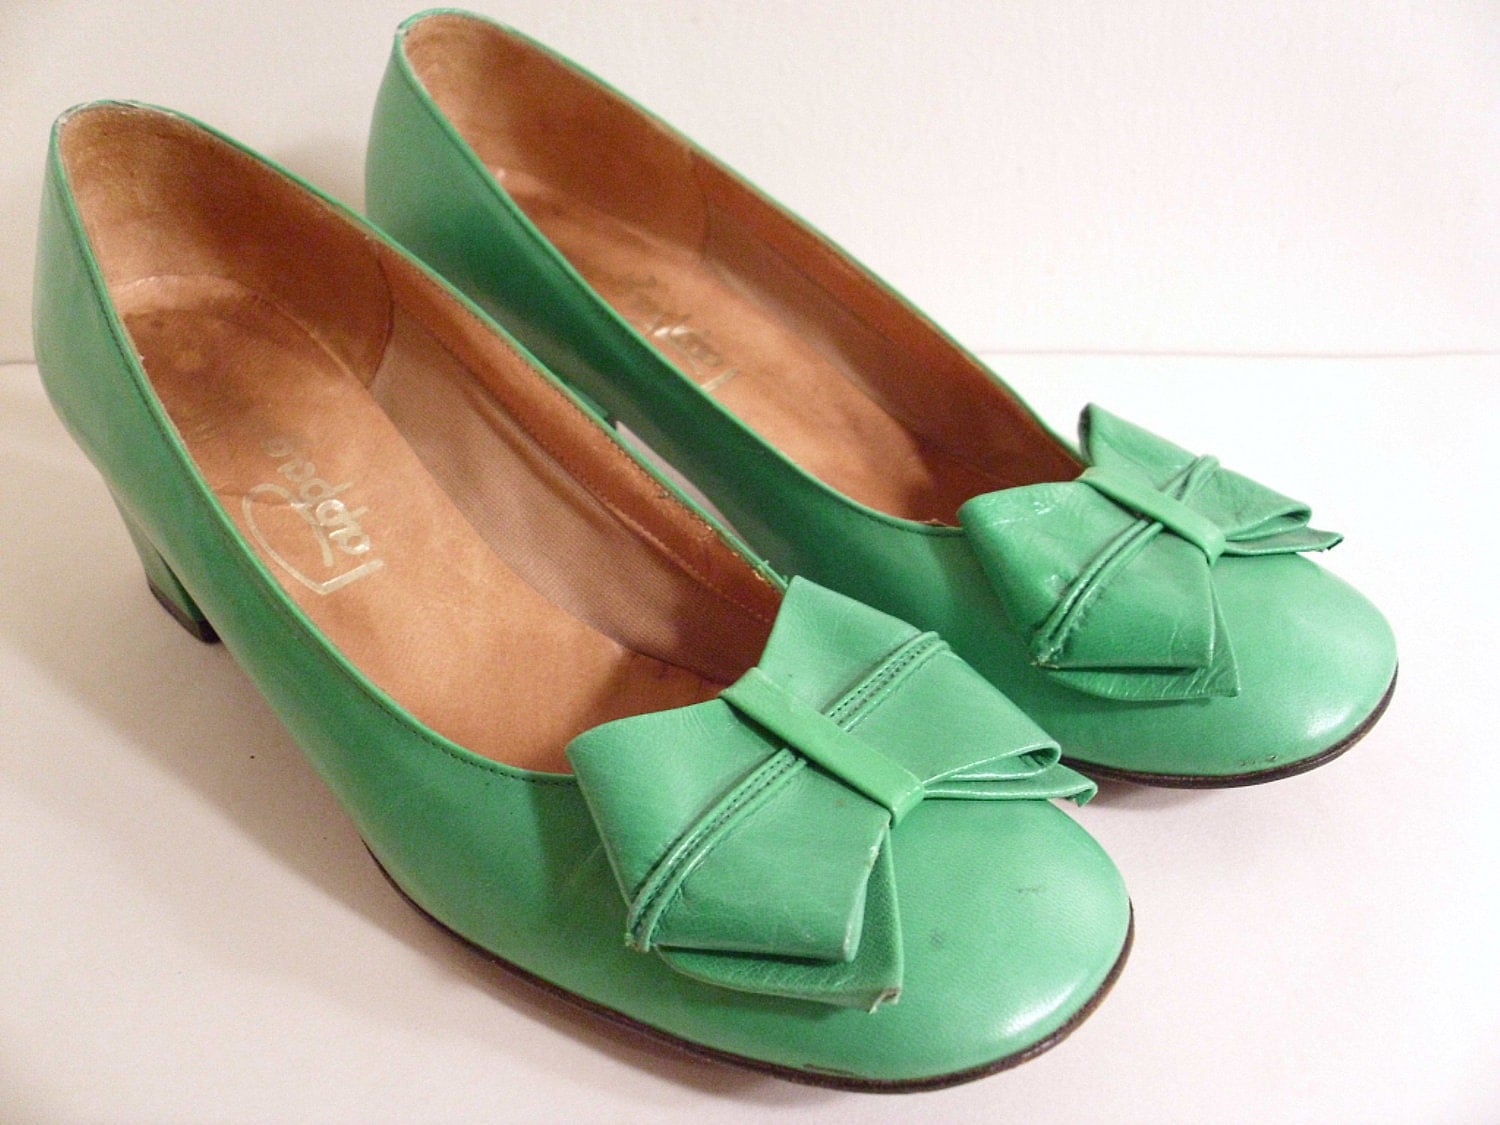 Vintage Green Leather Pappagallo Shoes 6 1/2 M